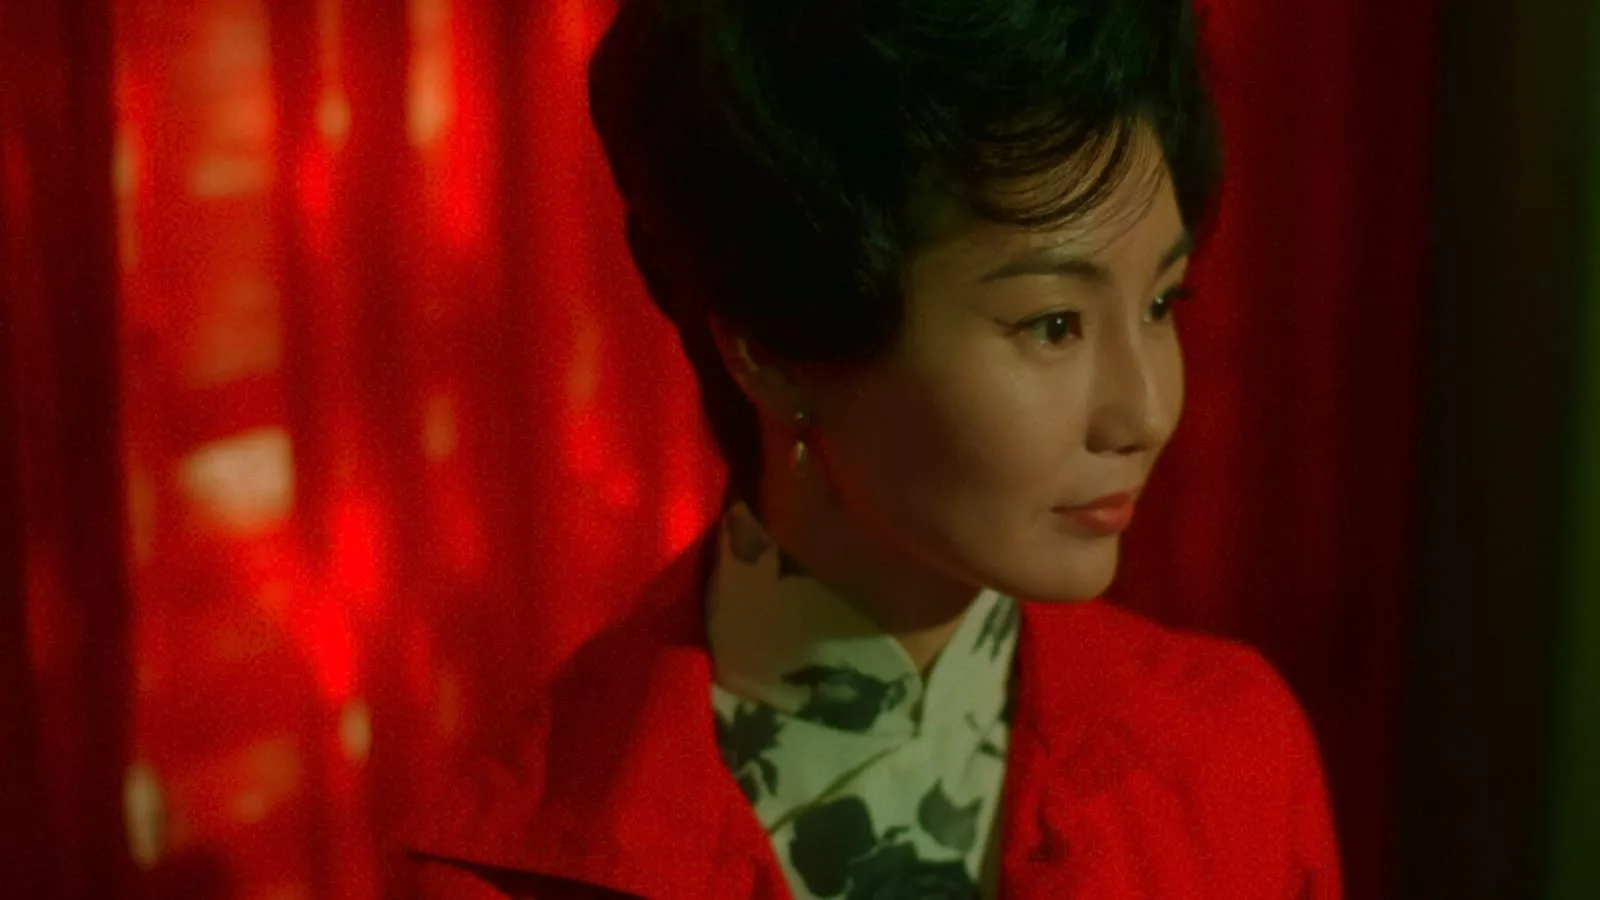 Su Li-zhen played by Maggie Cheung Man-yuk in a red overcoat dreaming about love